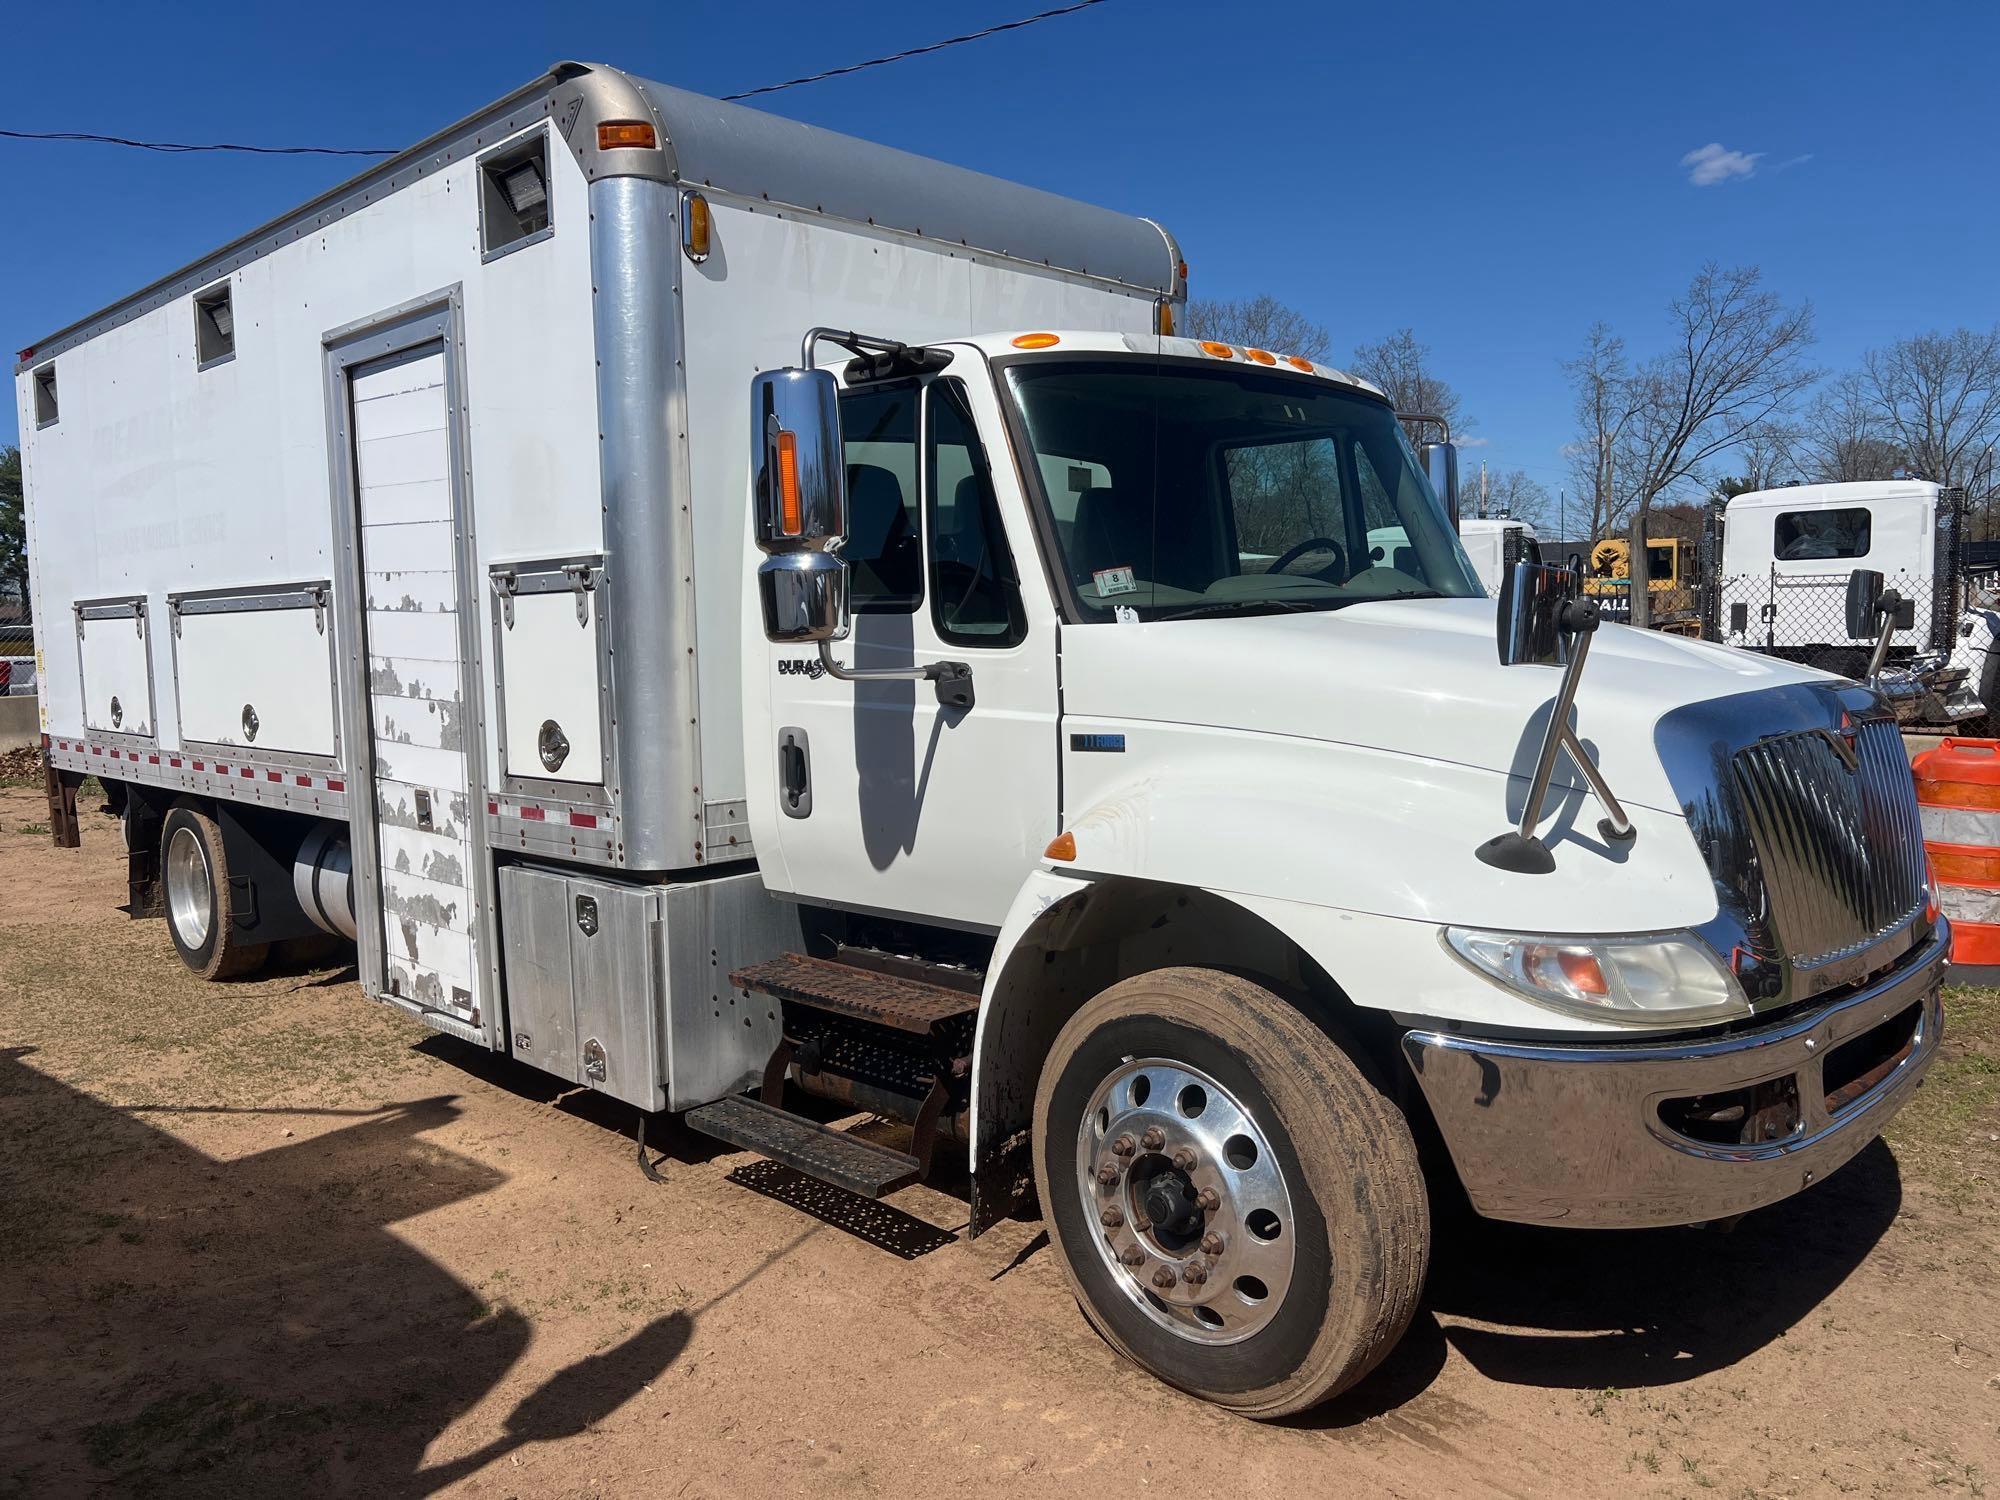 2012 INTERNATIONAL 4300 FUEL TRUCK VN:65466...powered by 6 cylinder diesel engine, equipped with